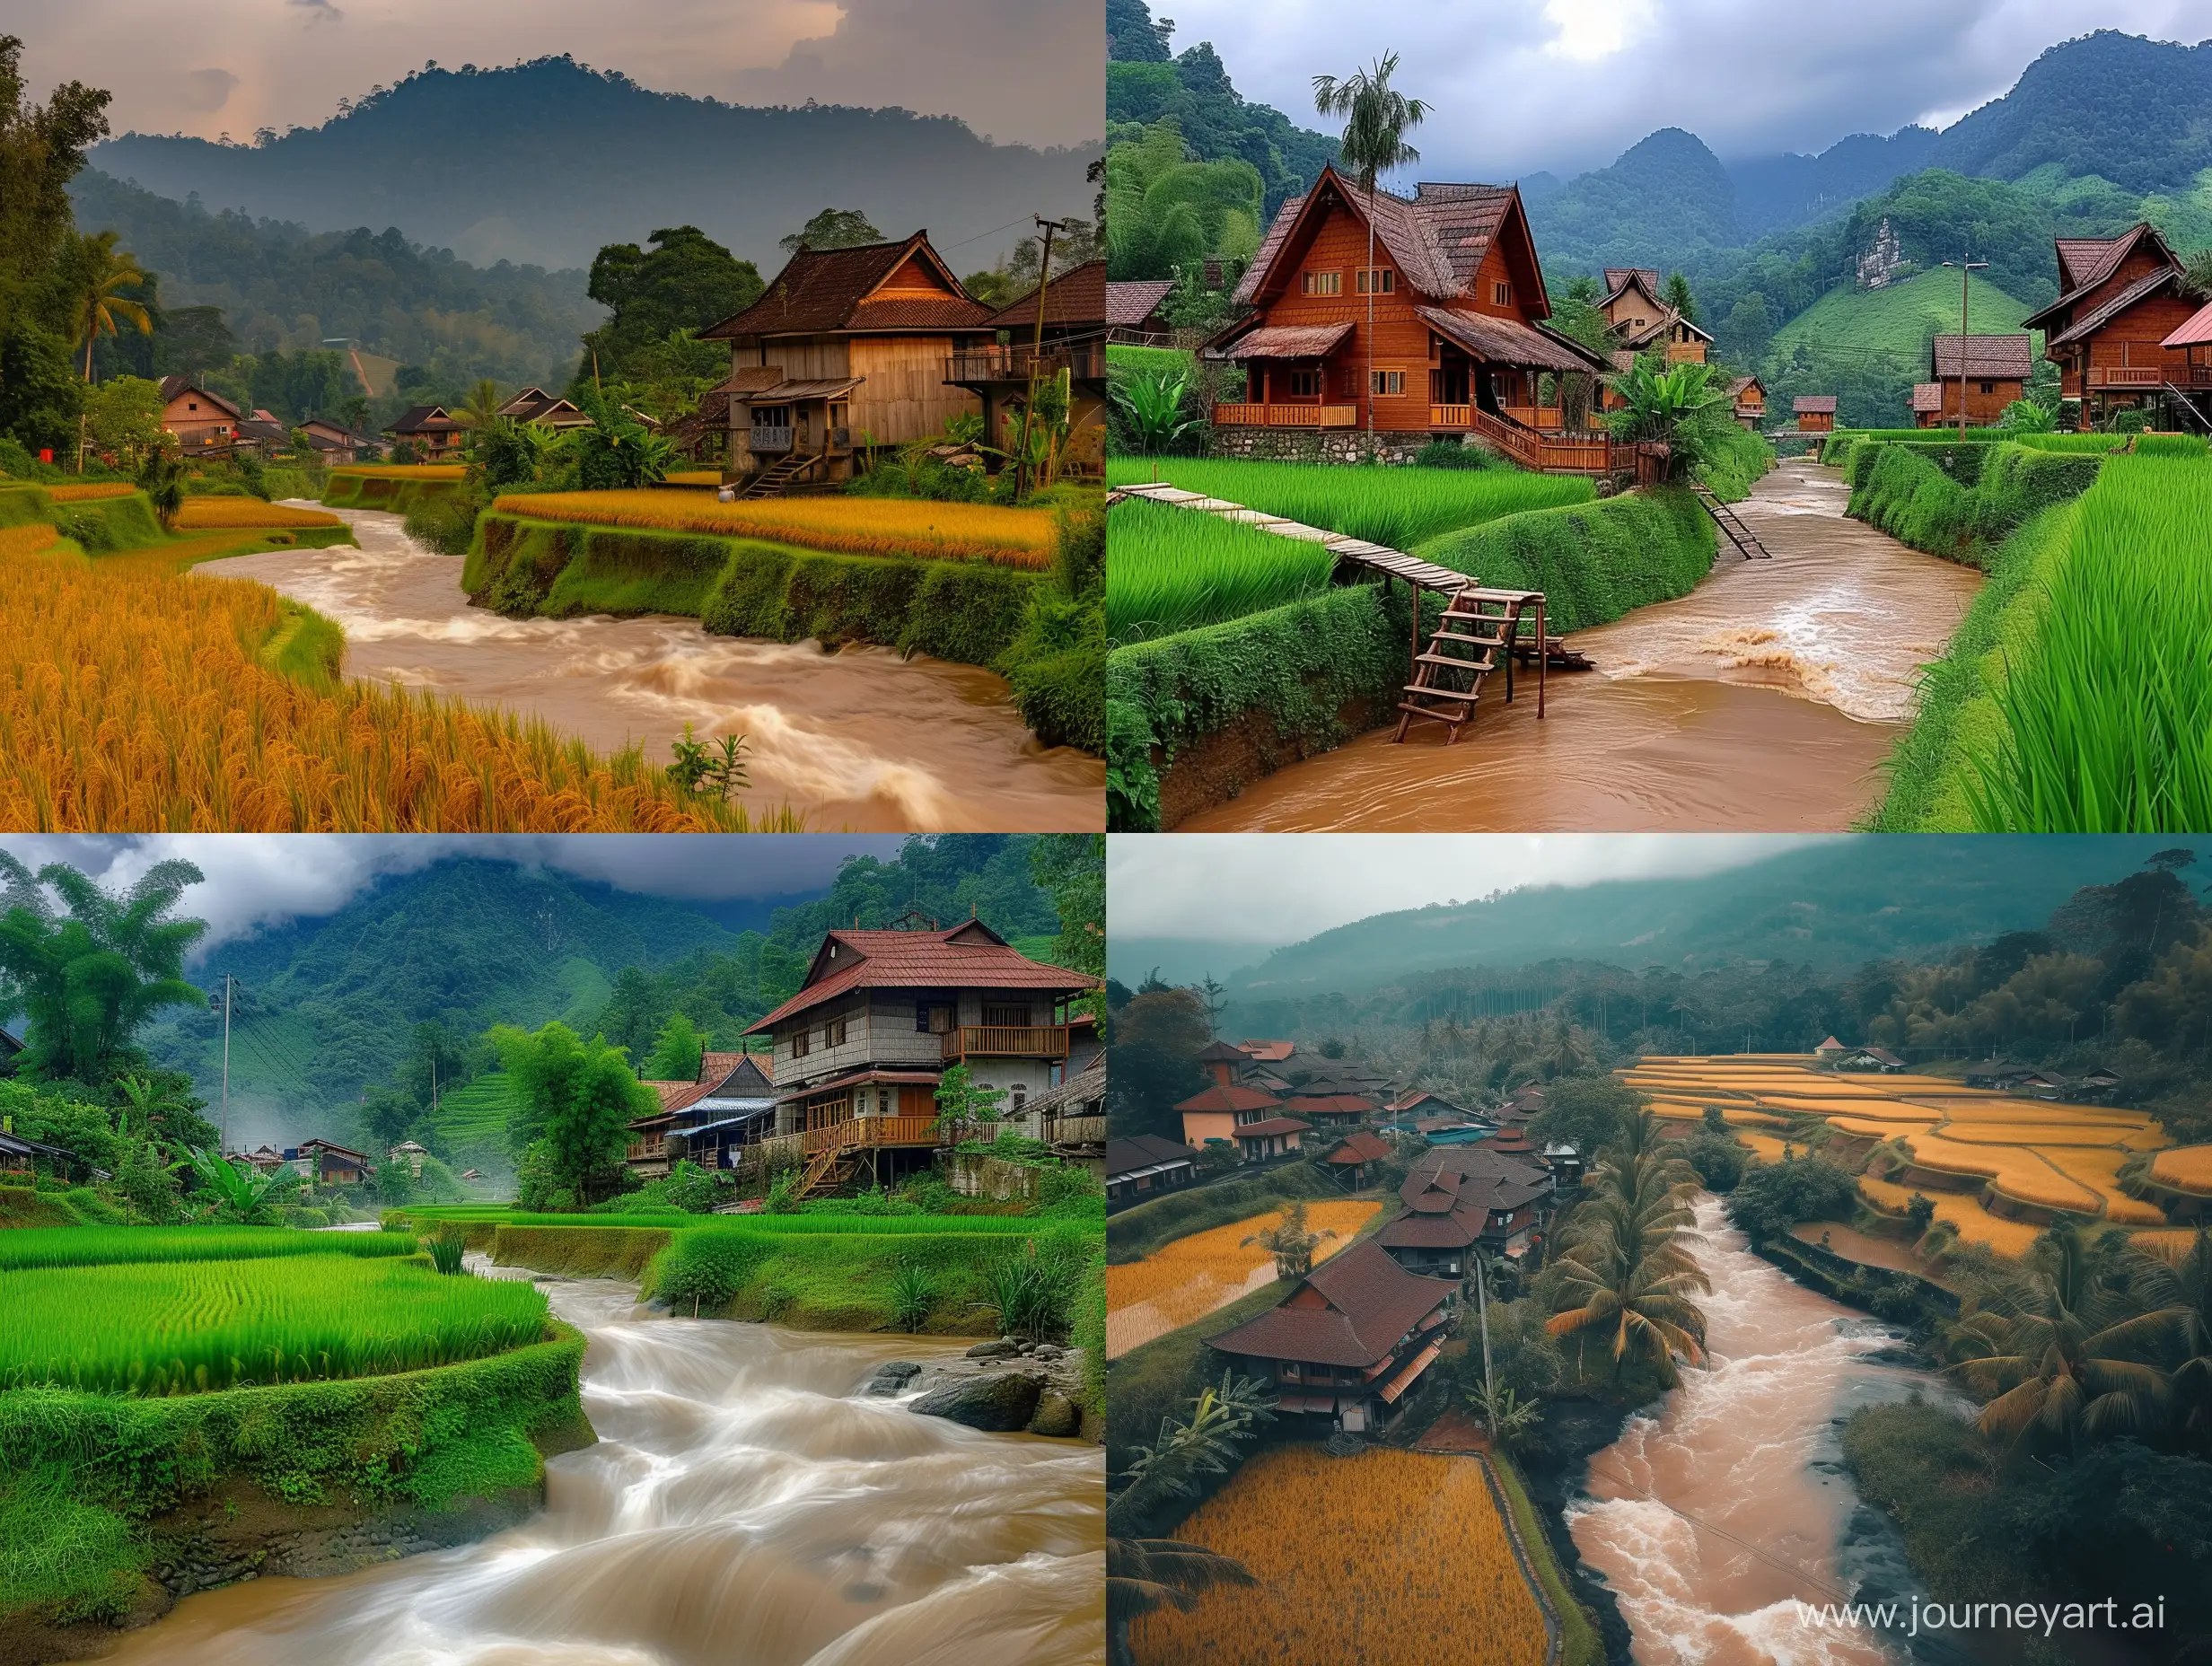 beautiful view of rice fields and houses near the mountains with flowing rivers, brown color, brown vibe,